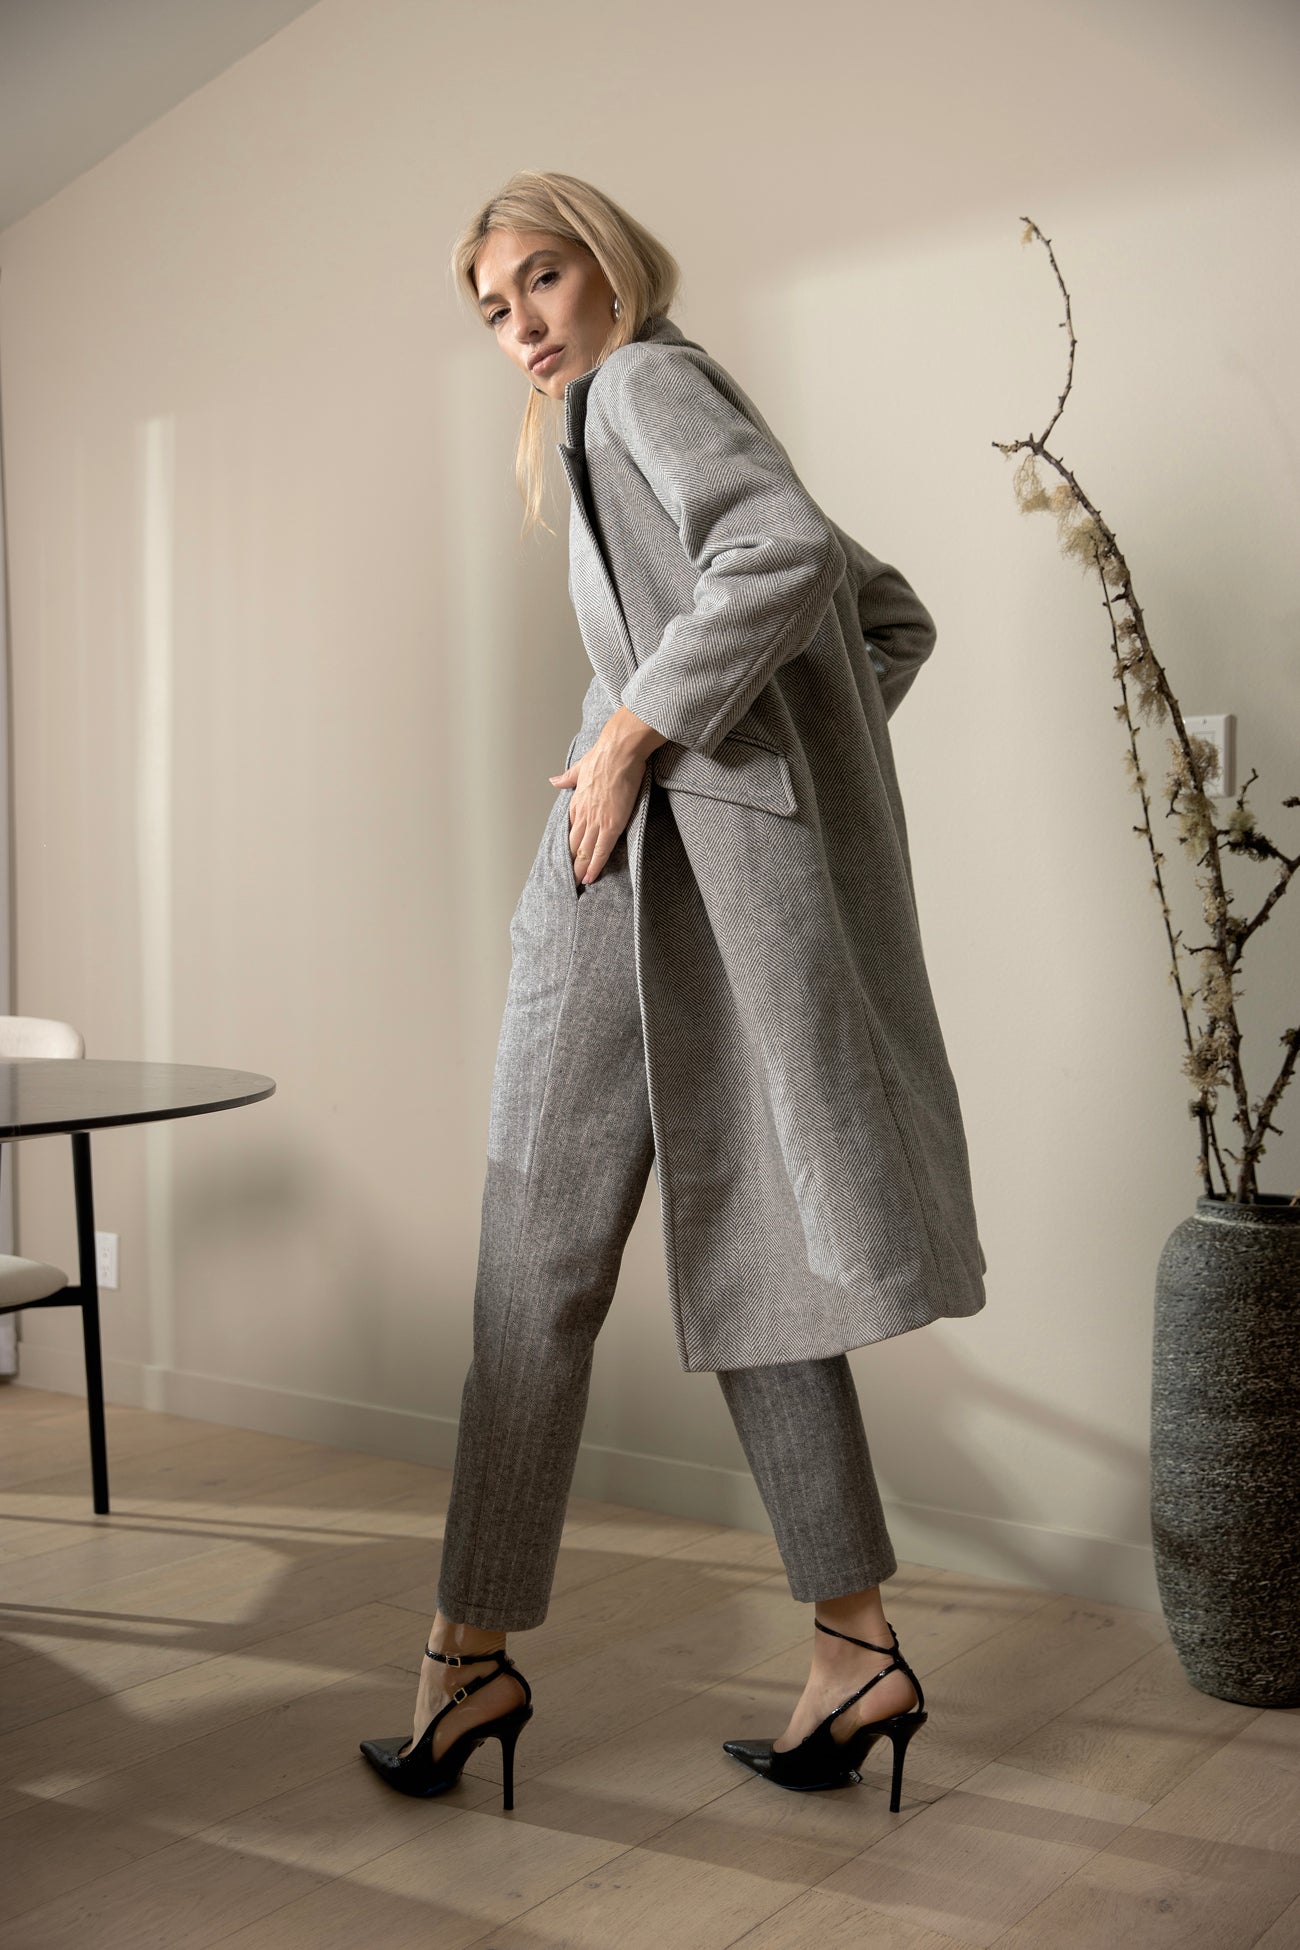 Line & Dot Paola Coat in Heather Grey